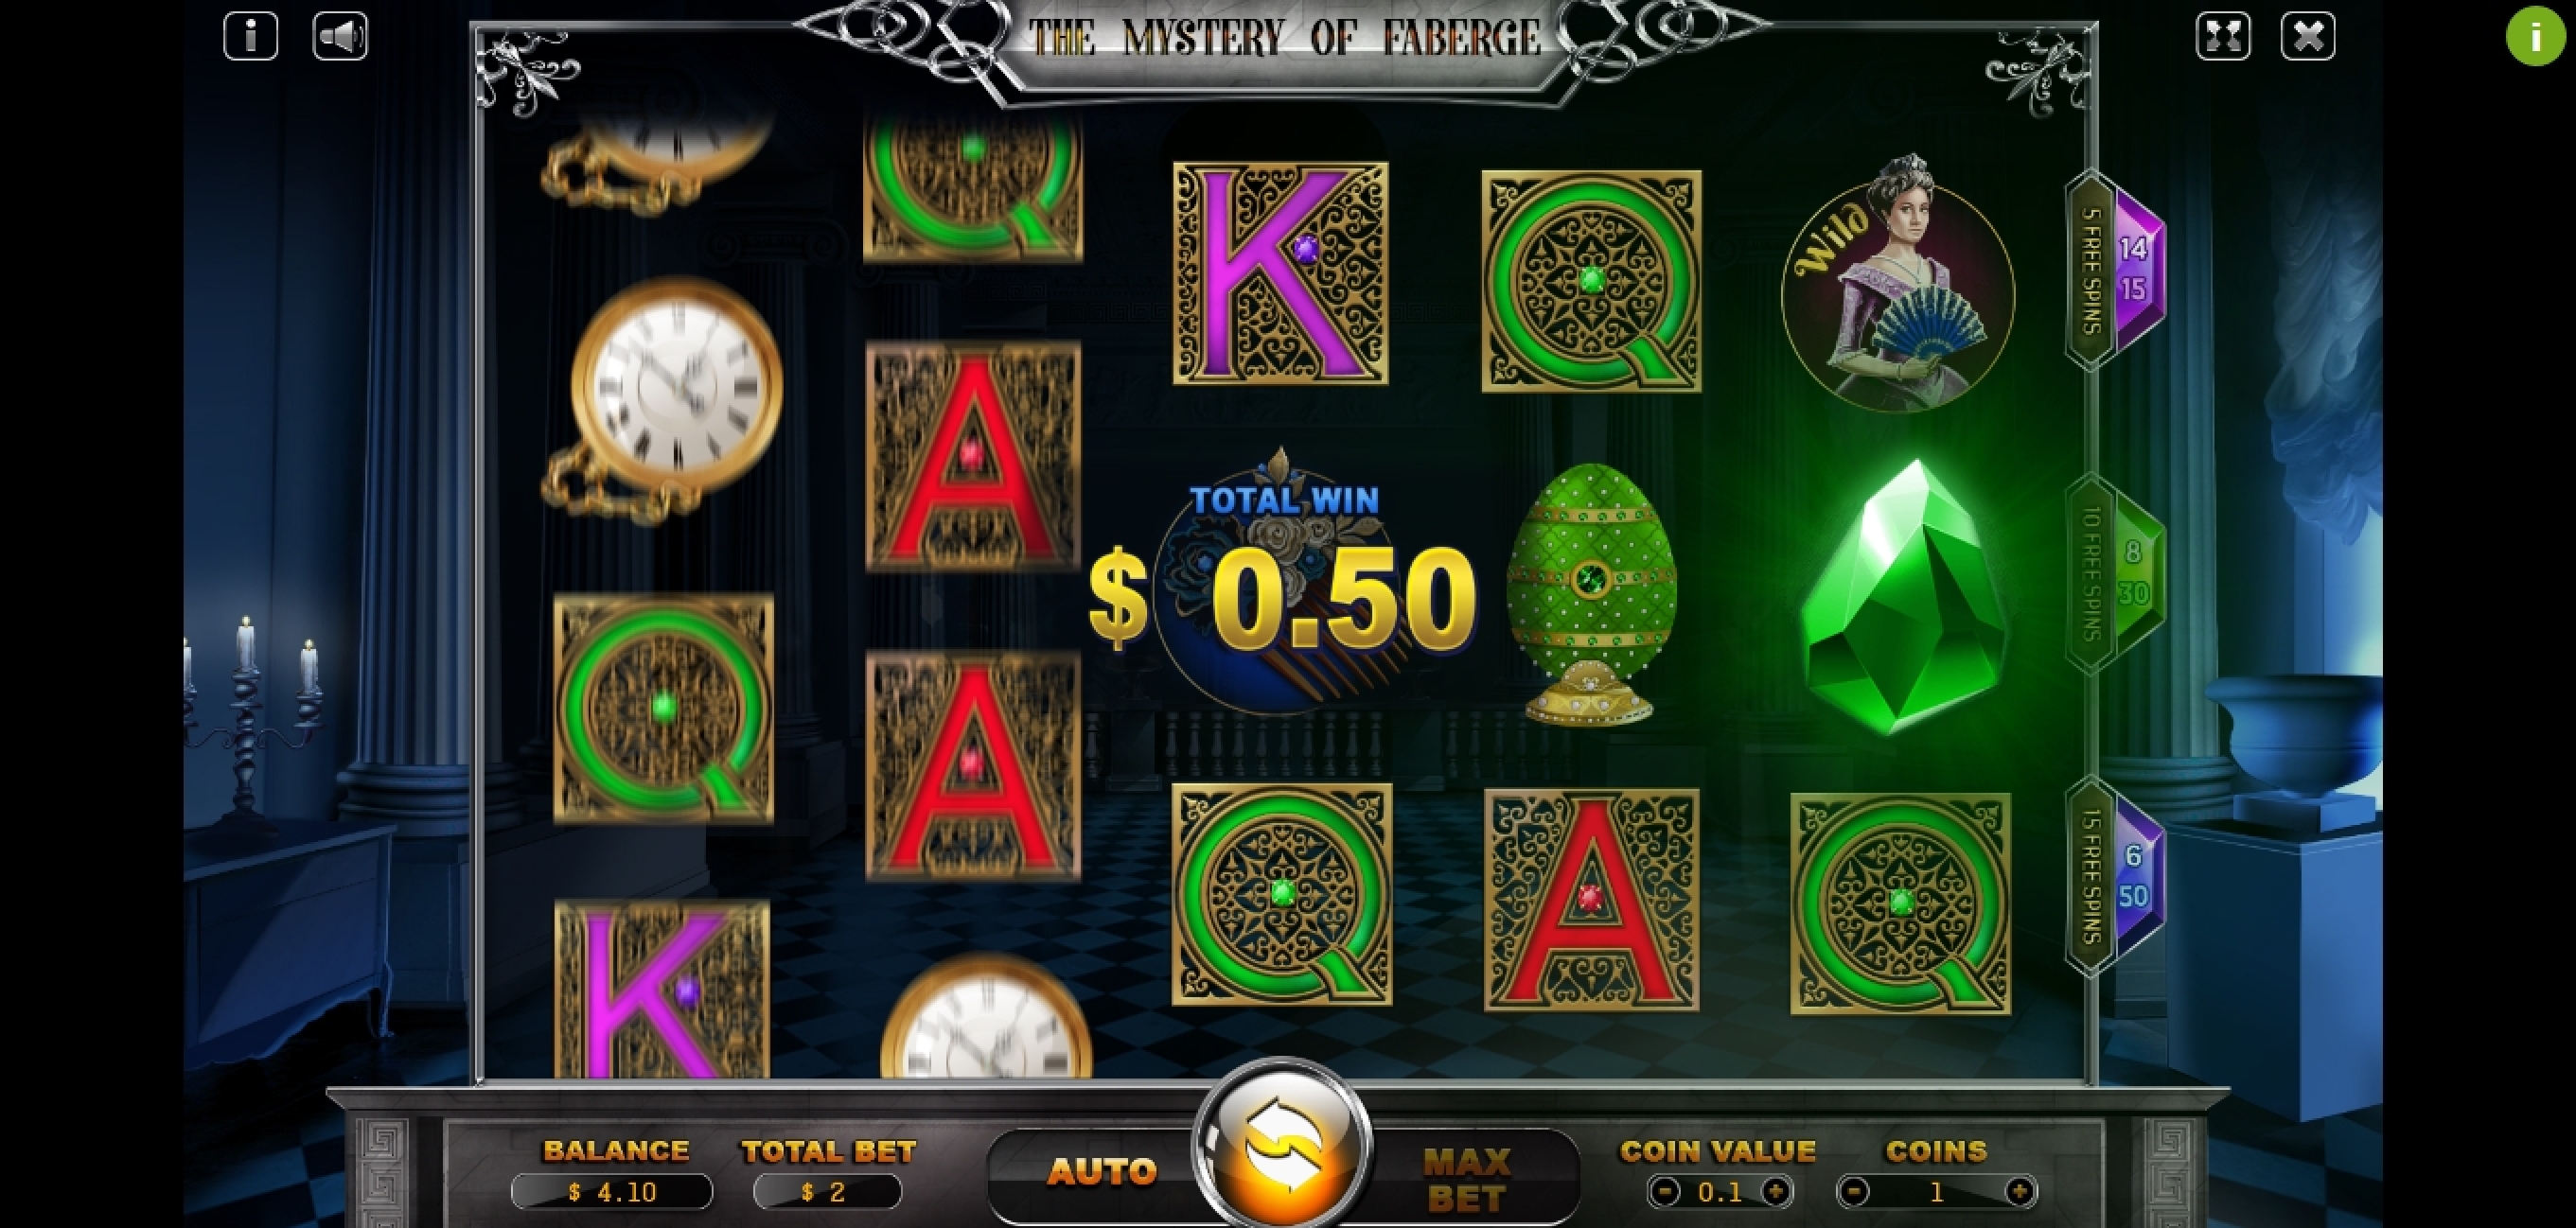 Win Money in The Mystery of Faberge Free Slot Game by Charismatic